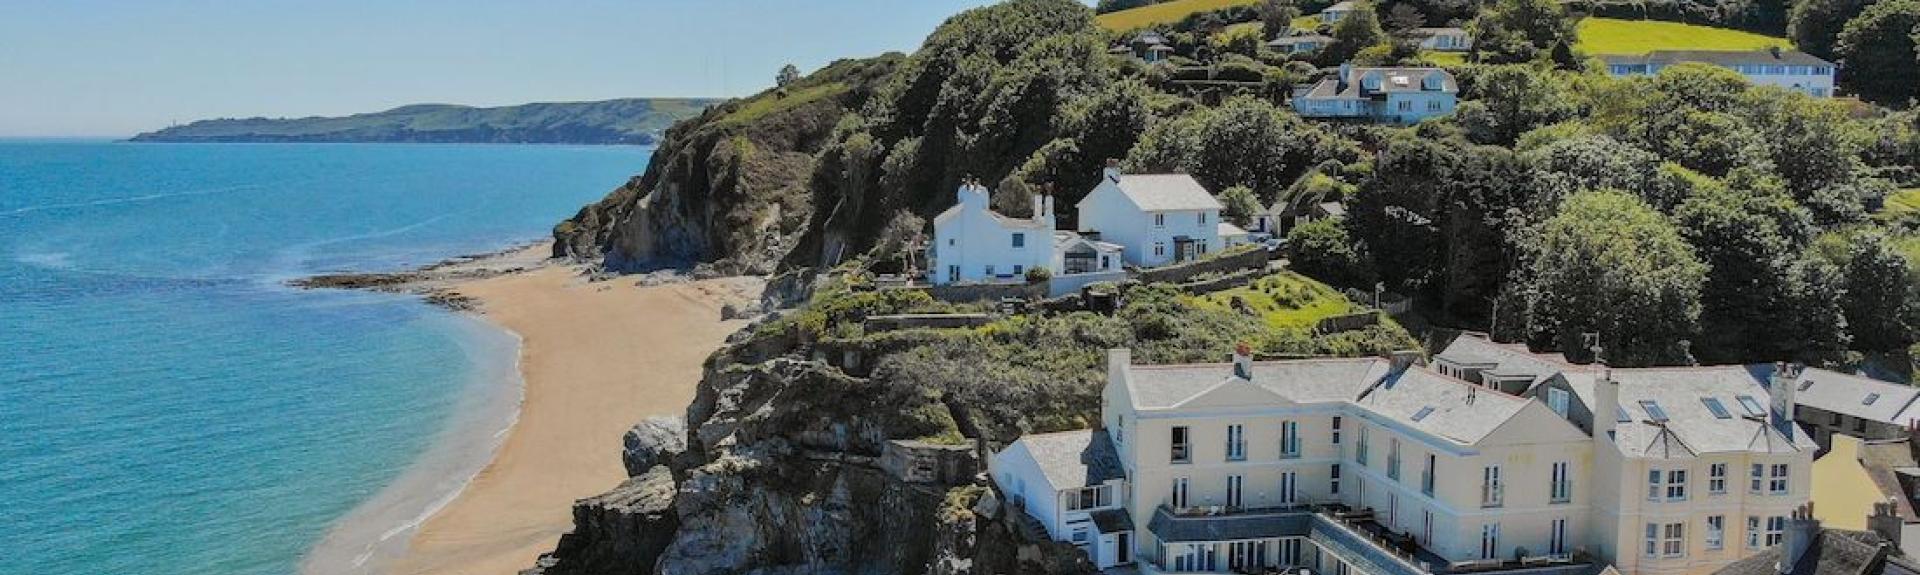 Cottages on a promenade look over a sandy South Devon beach.